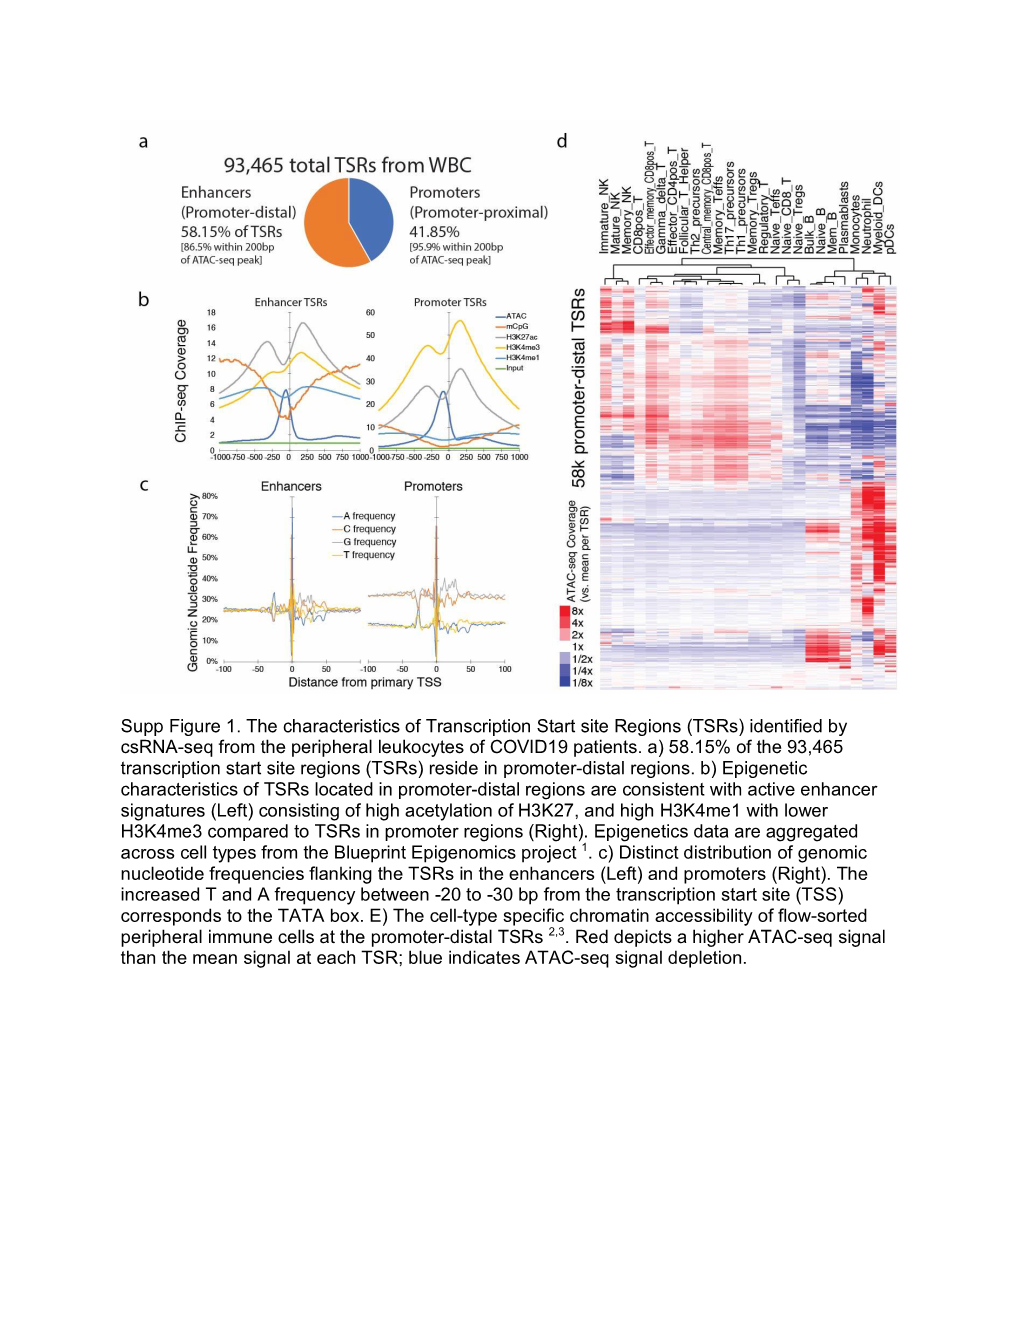 Supp Figure 1. the Characteristics of Transcription Start Site Regions (Tsrs) Identified by Csrna-Seq from the Peripheral Leukocytes of COVID19 Patients